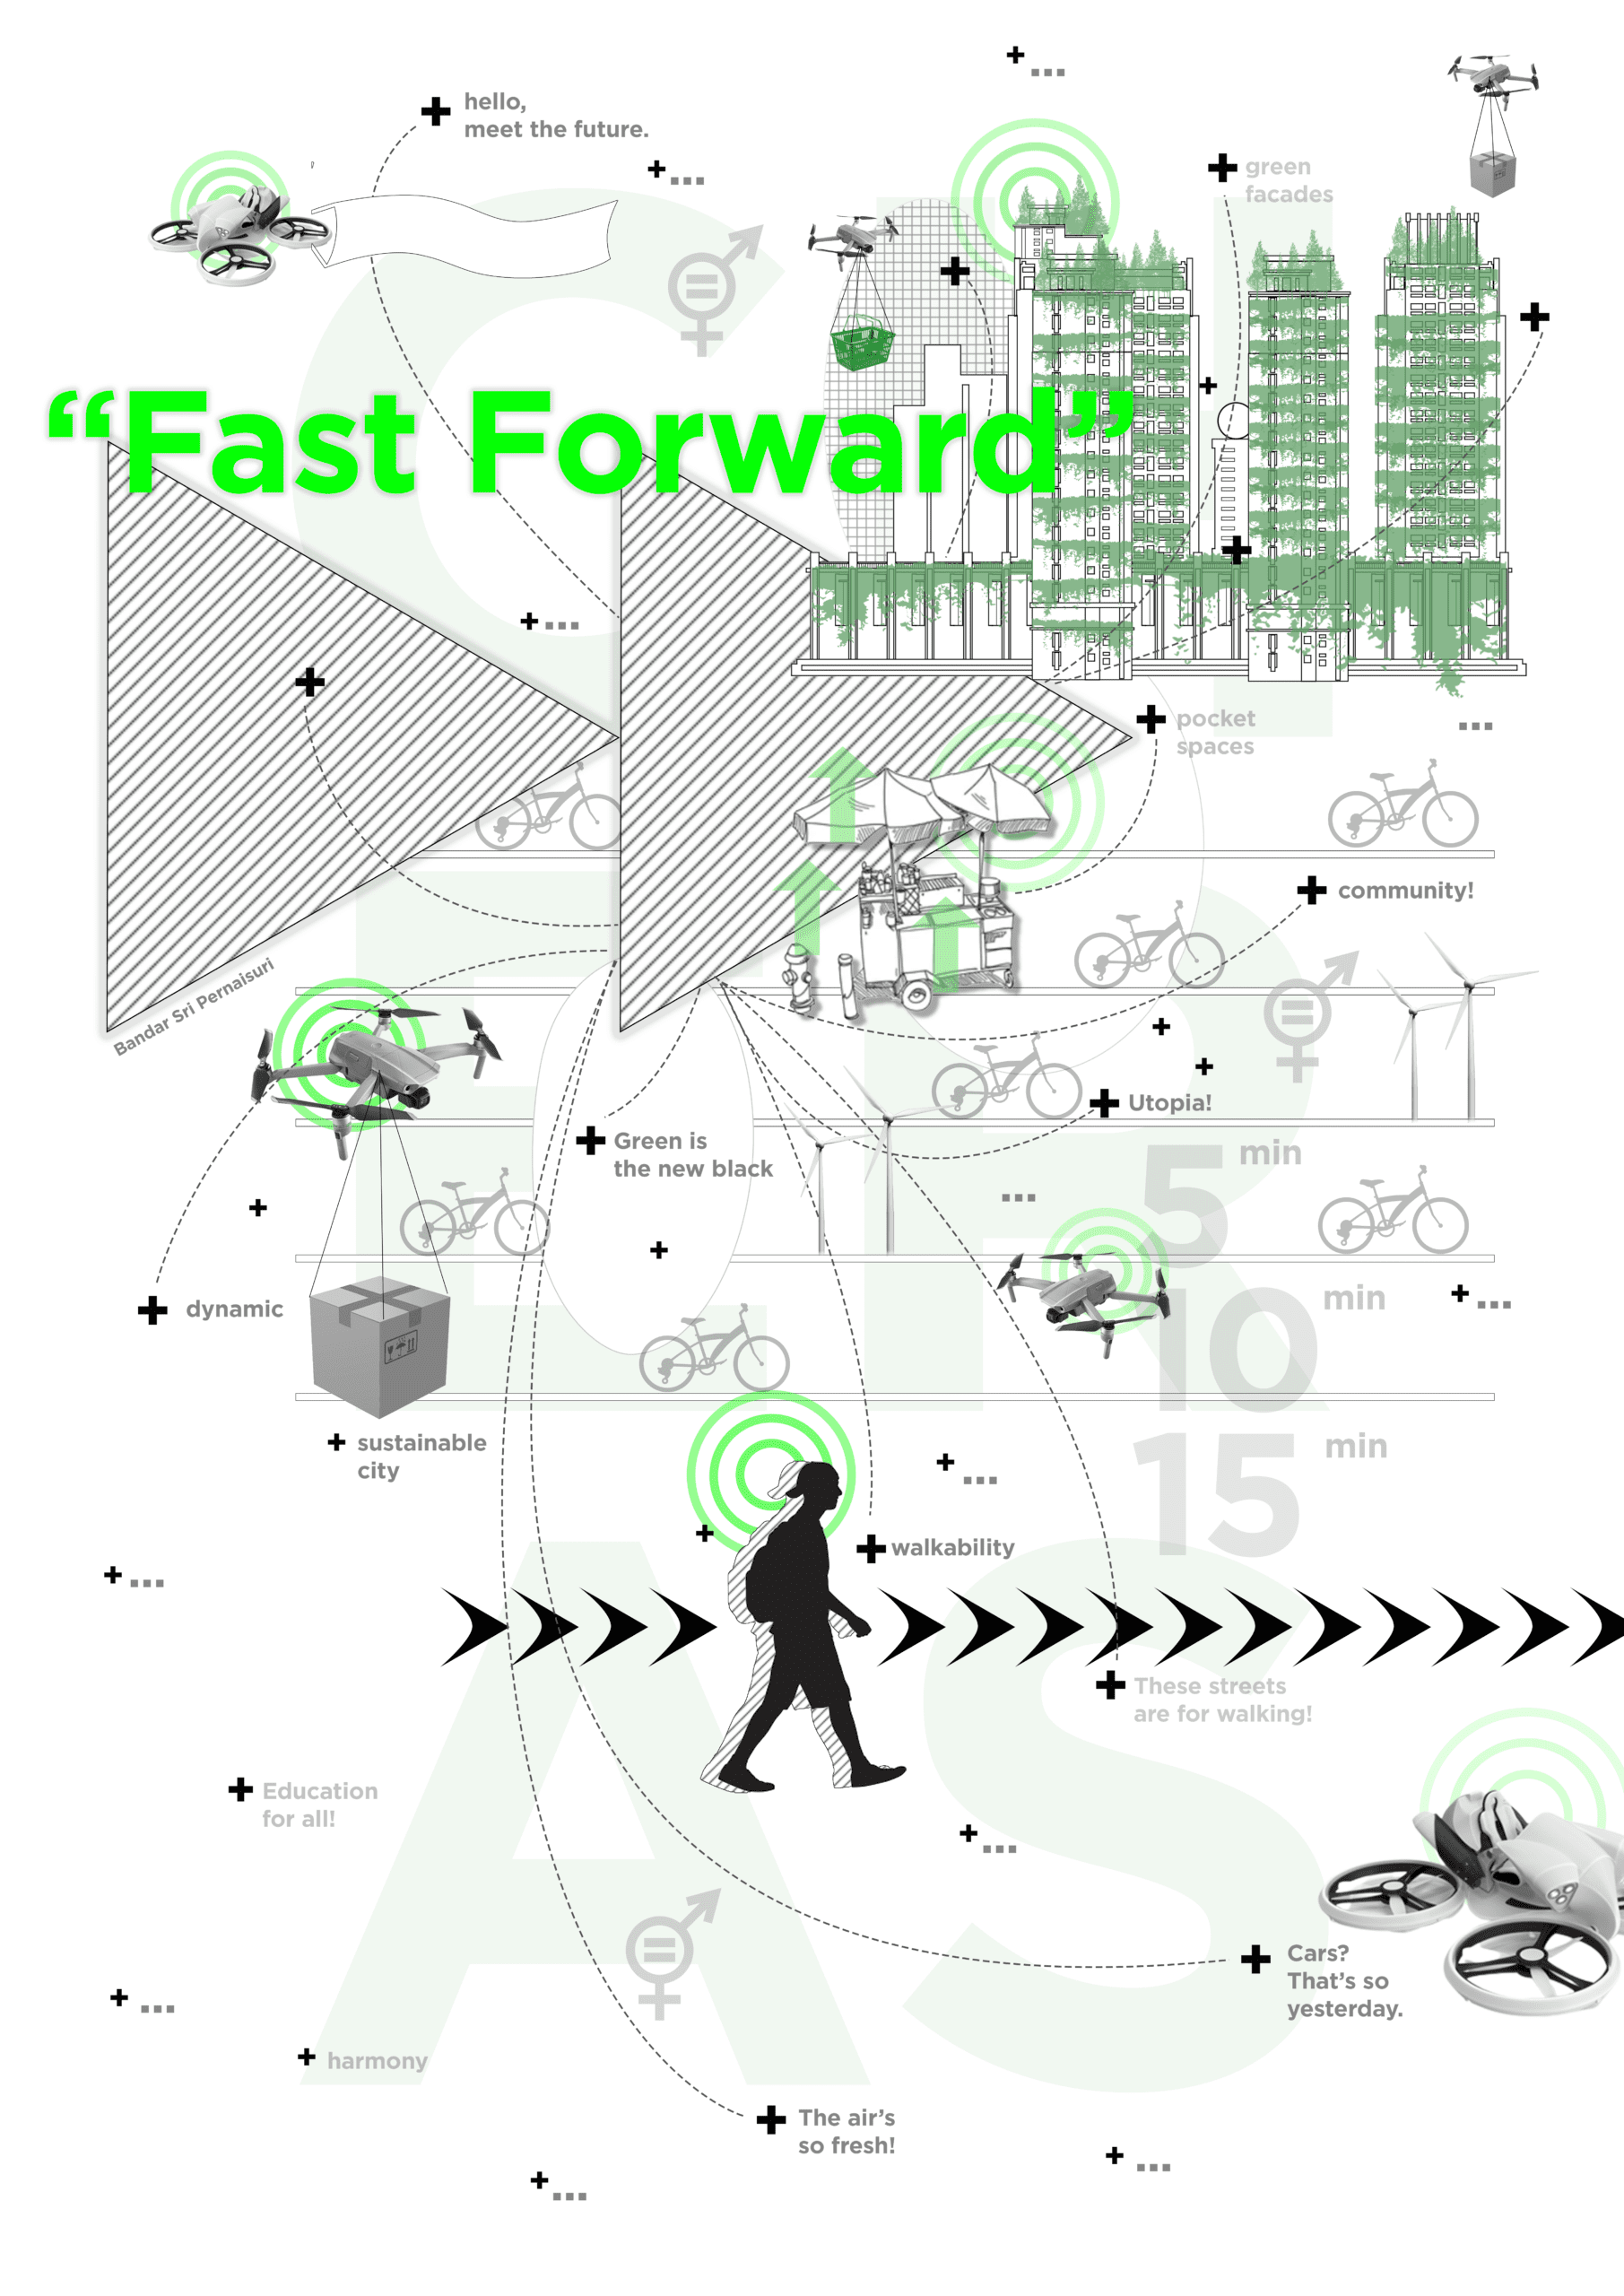 “Fast Forward” – BSP as Potential Sustainable City.